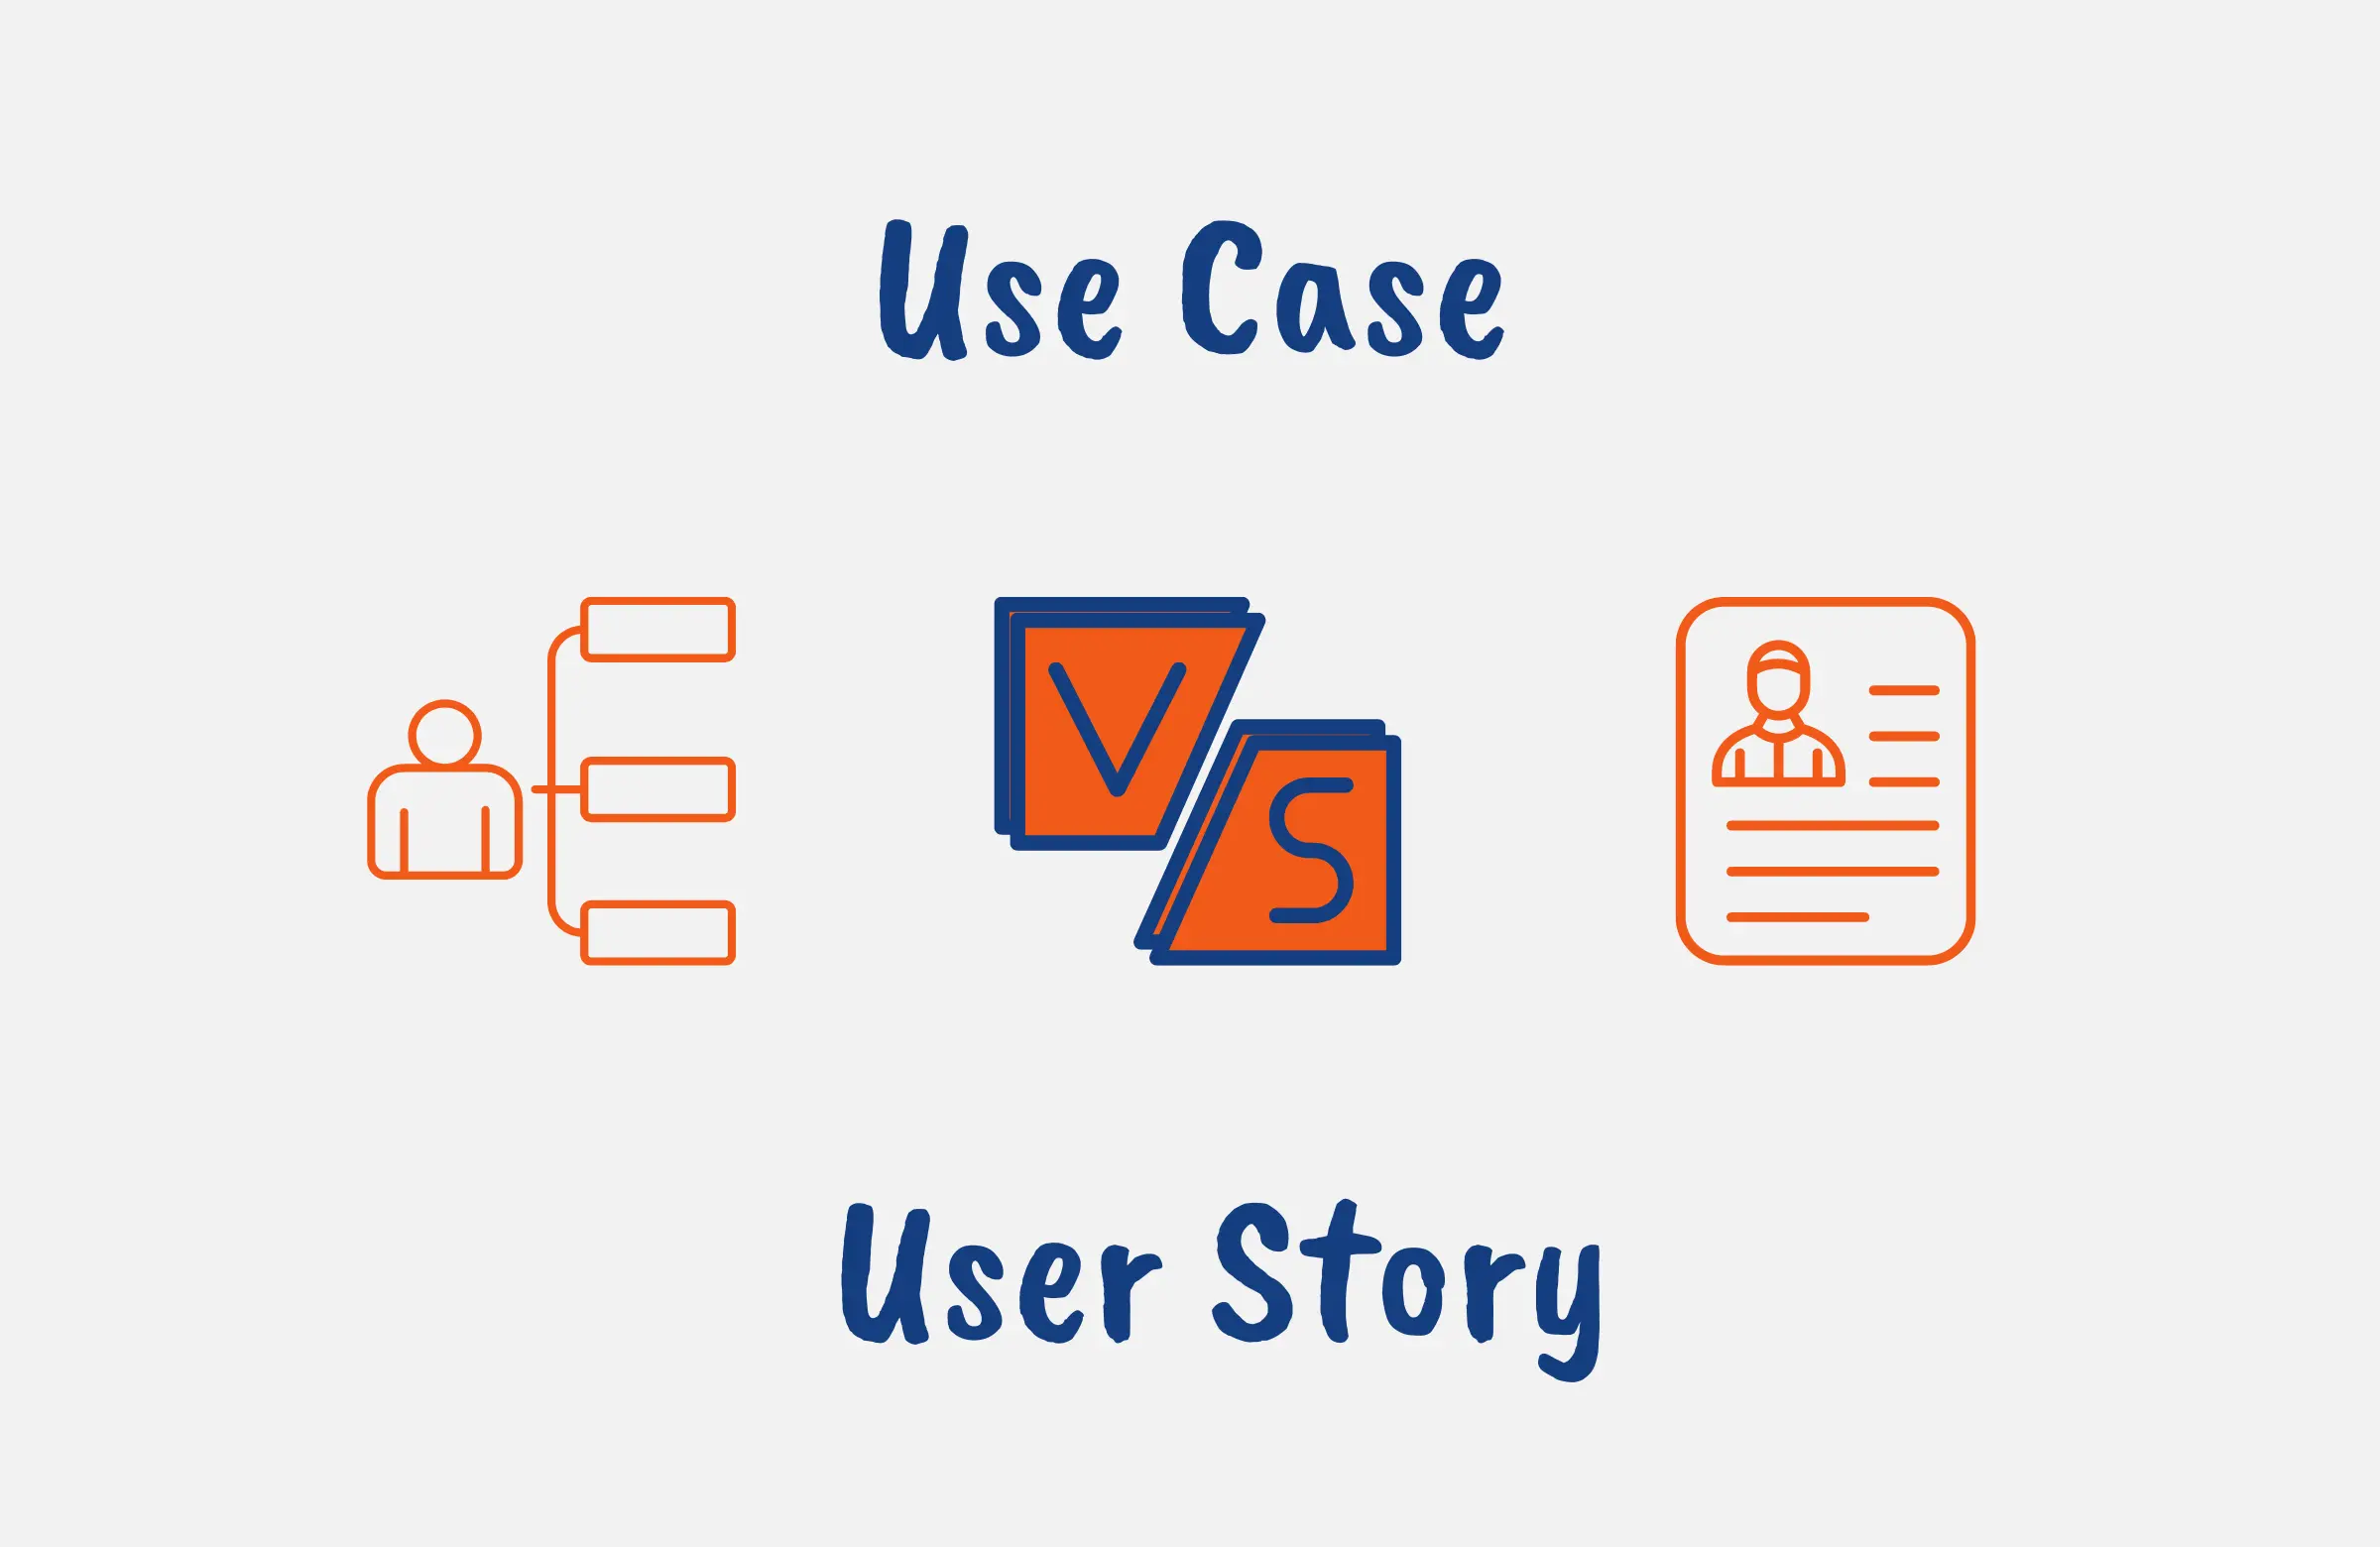 Difference Between Use Case and User Story